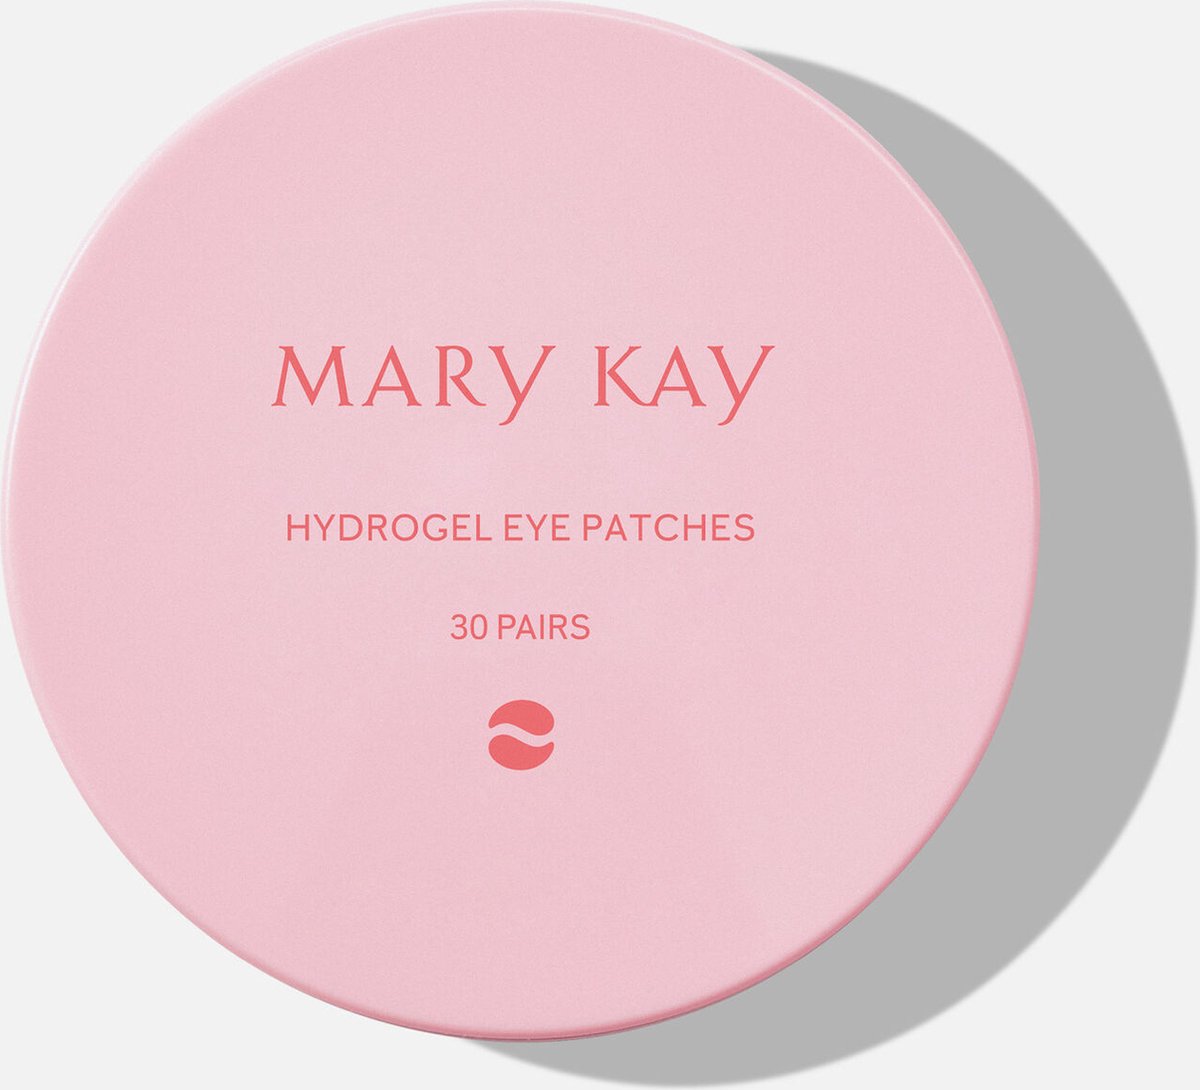 Mary Kay® Hydrogel Eye Patches 30 paar - oog patches